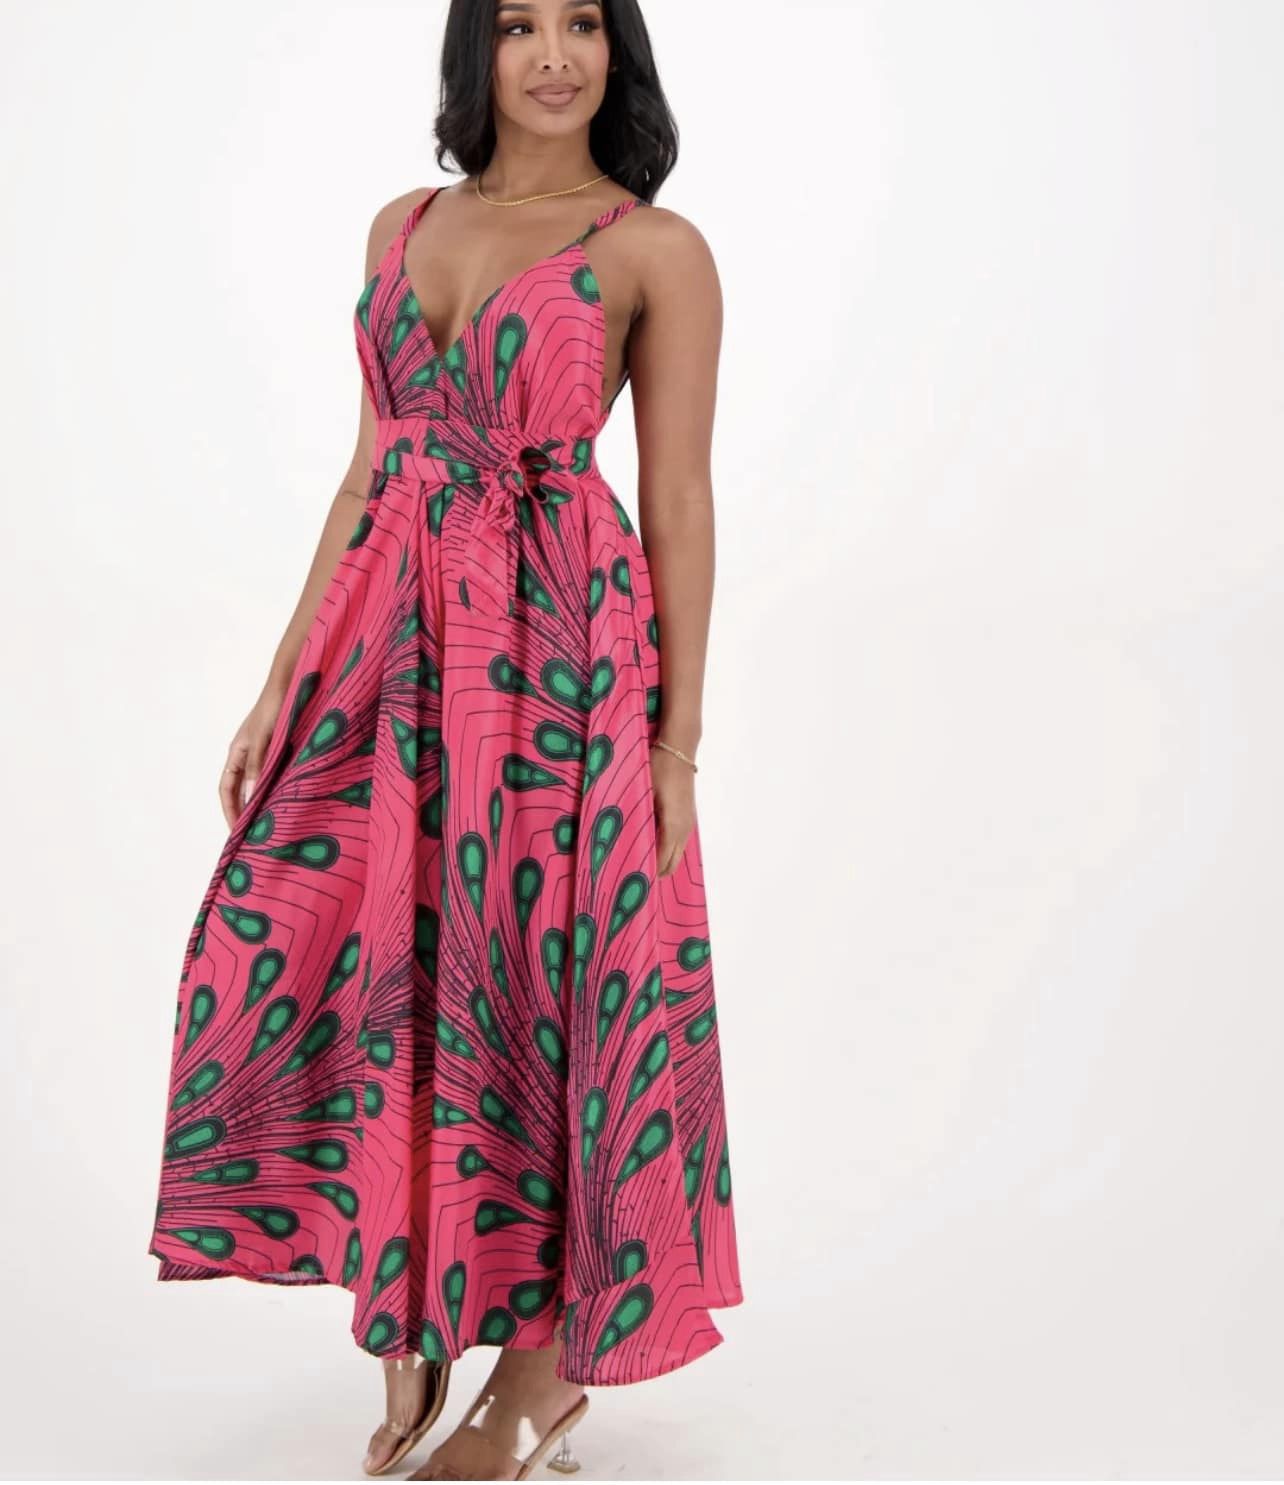 Silk Pink and Green African Inspired Dress Pretty Girl